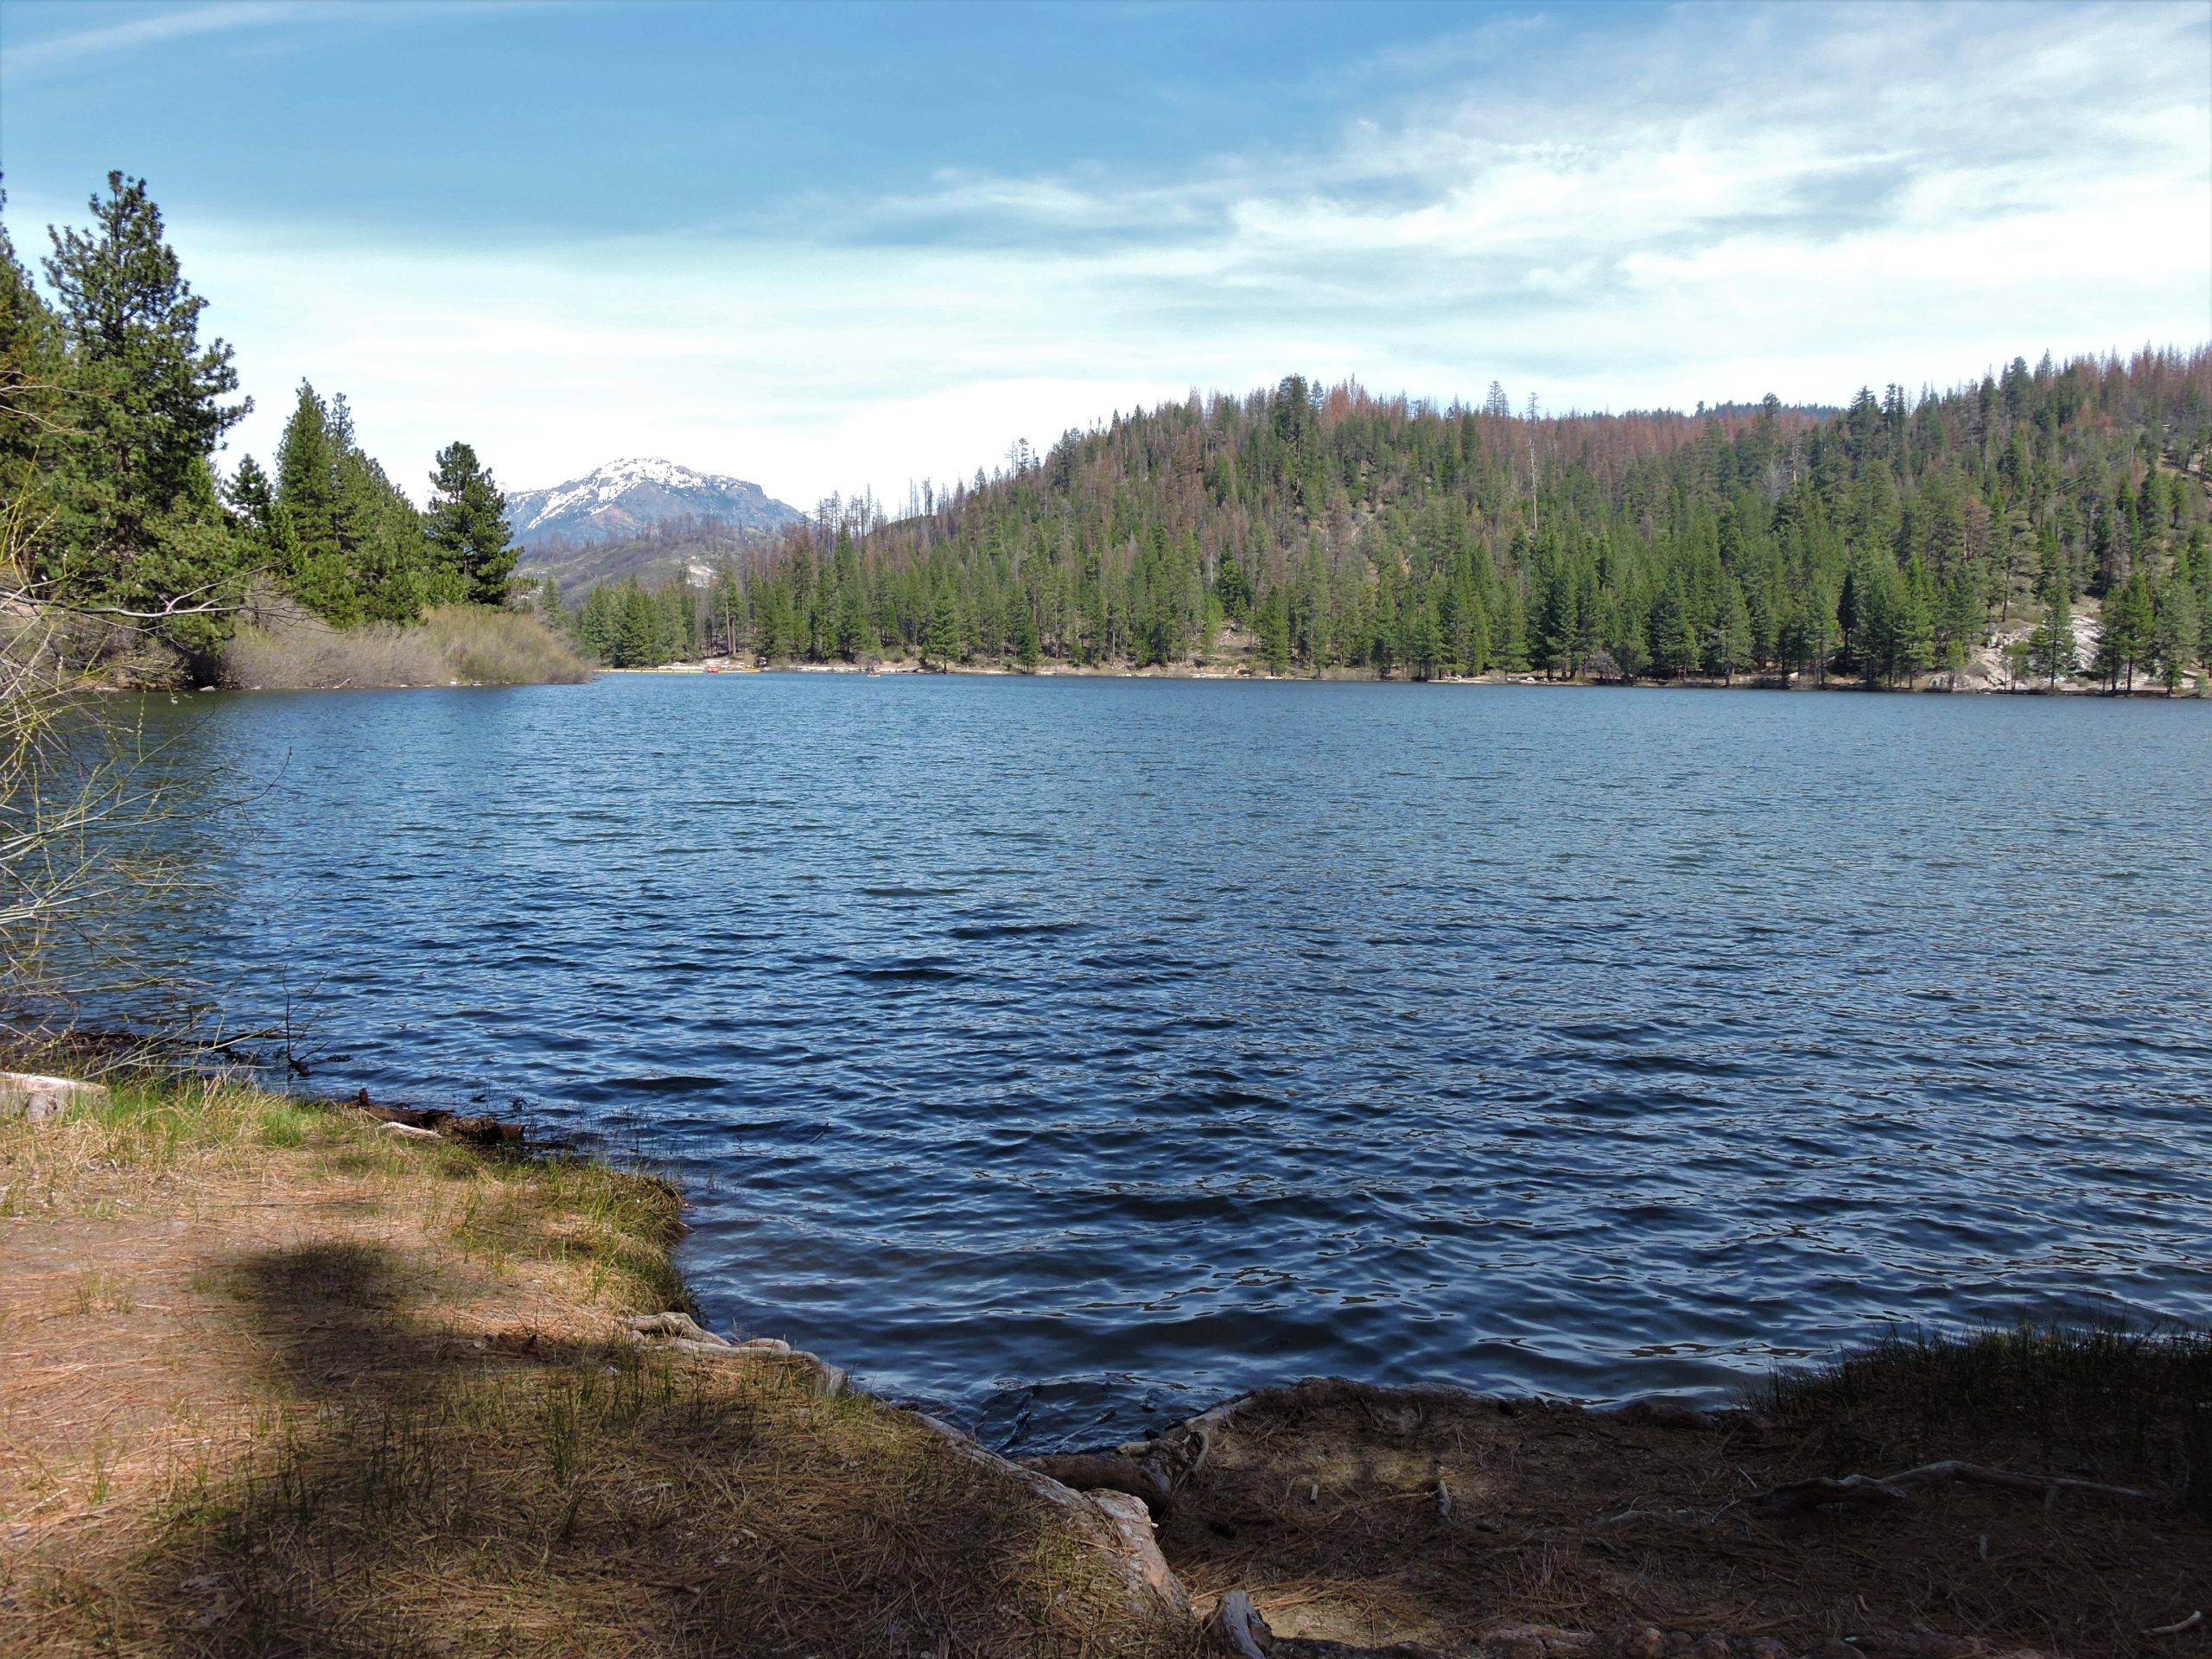 Hume Lake in Kings Canyon National Park